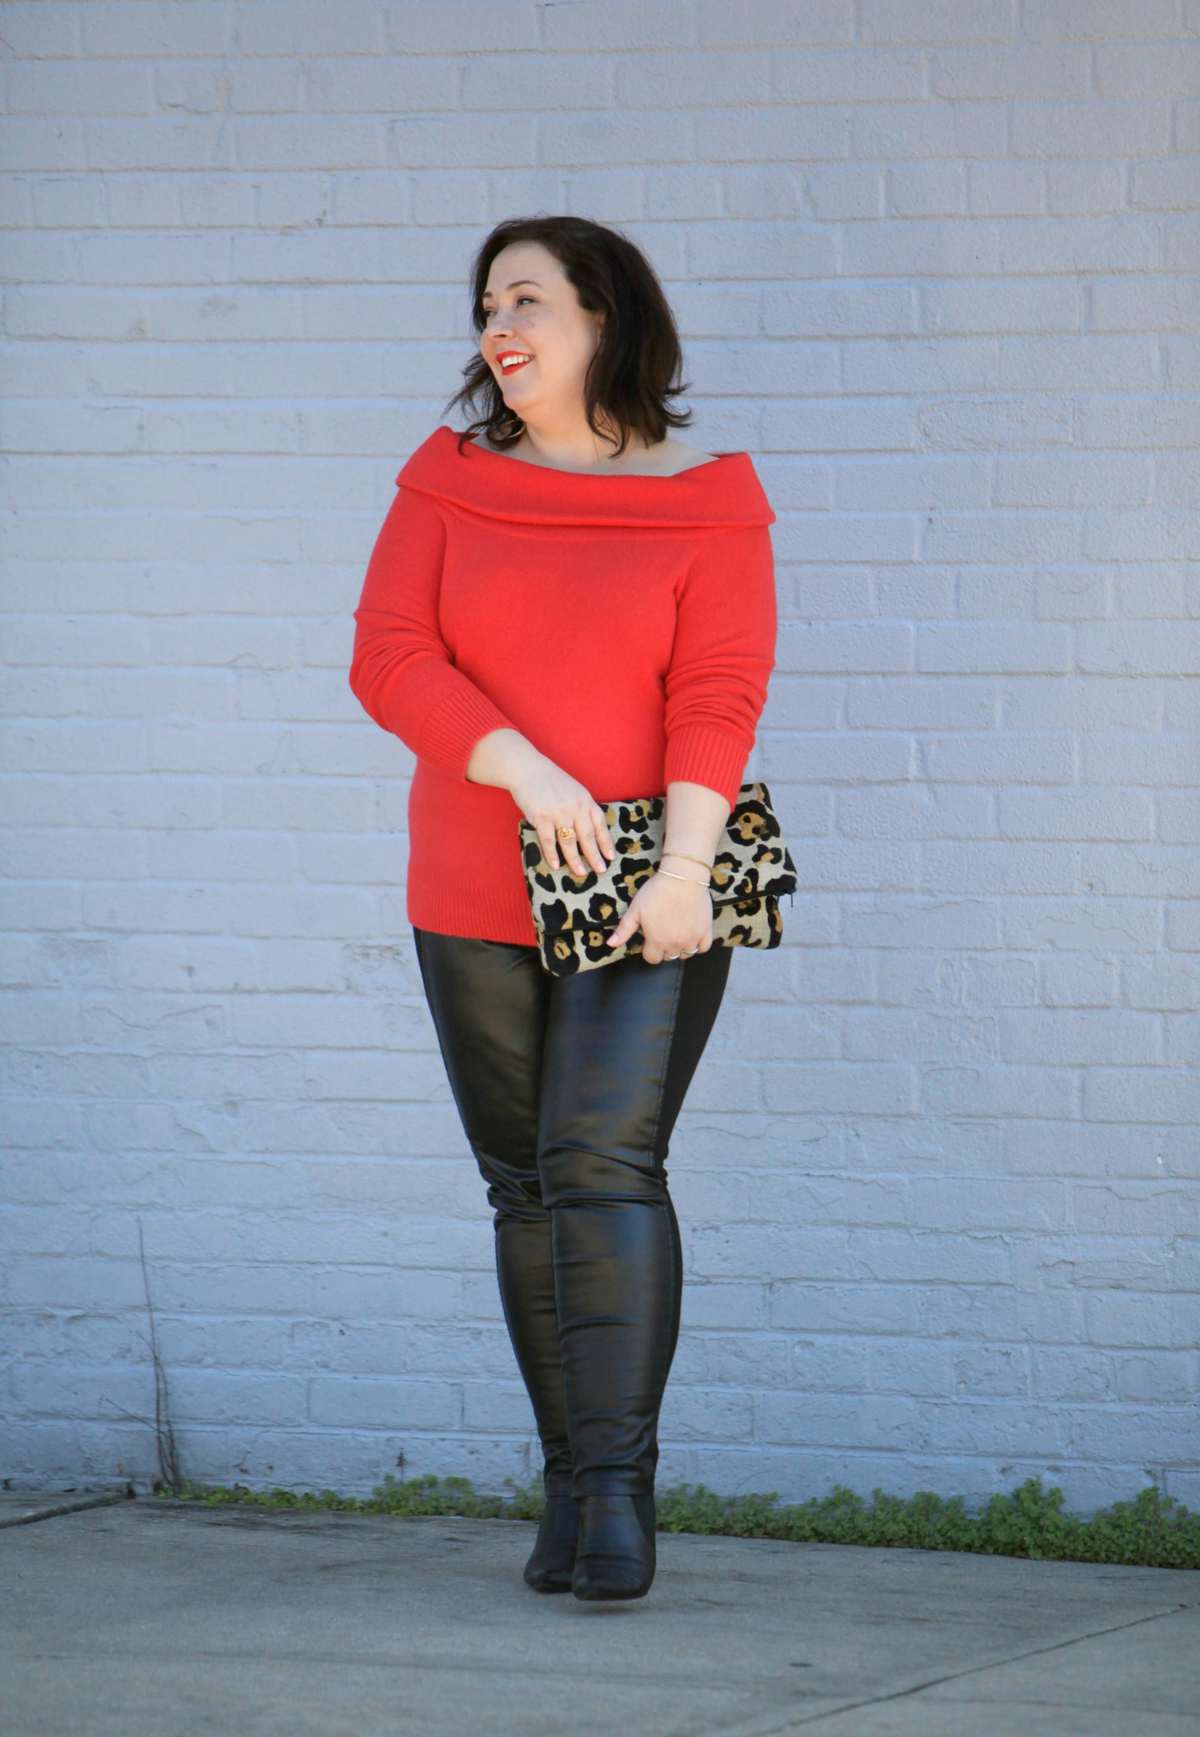 Wardrobe Oxygen, over 40 size 14 fashion blogger in a Vince Camuto sweater from Gwynnie Bee styled with Stella Carakasi faux leather front ponte pants and a leopard clutch from Love,Cortnie